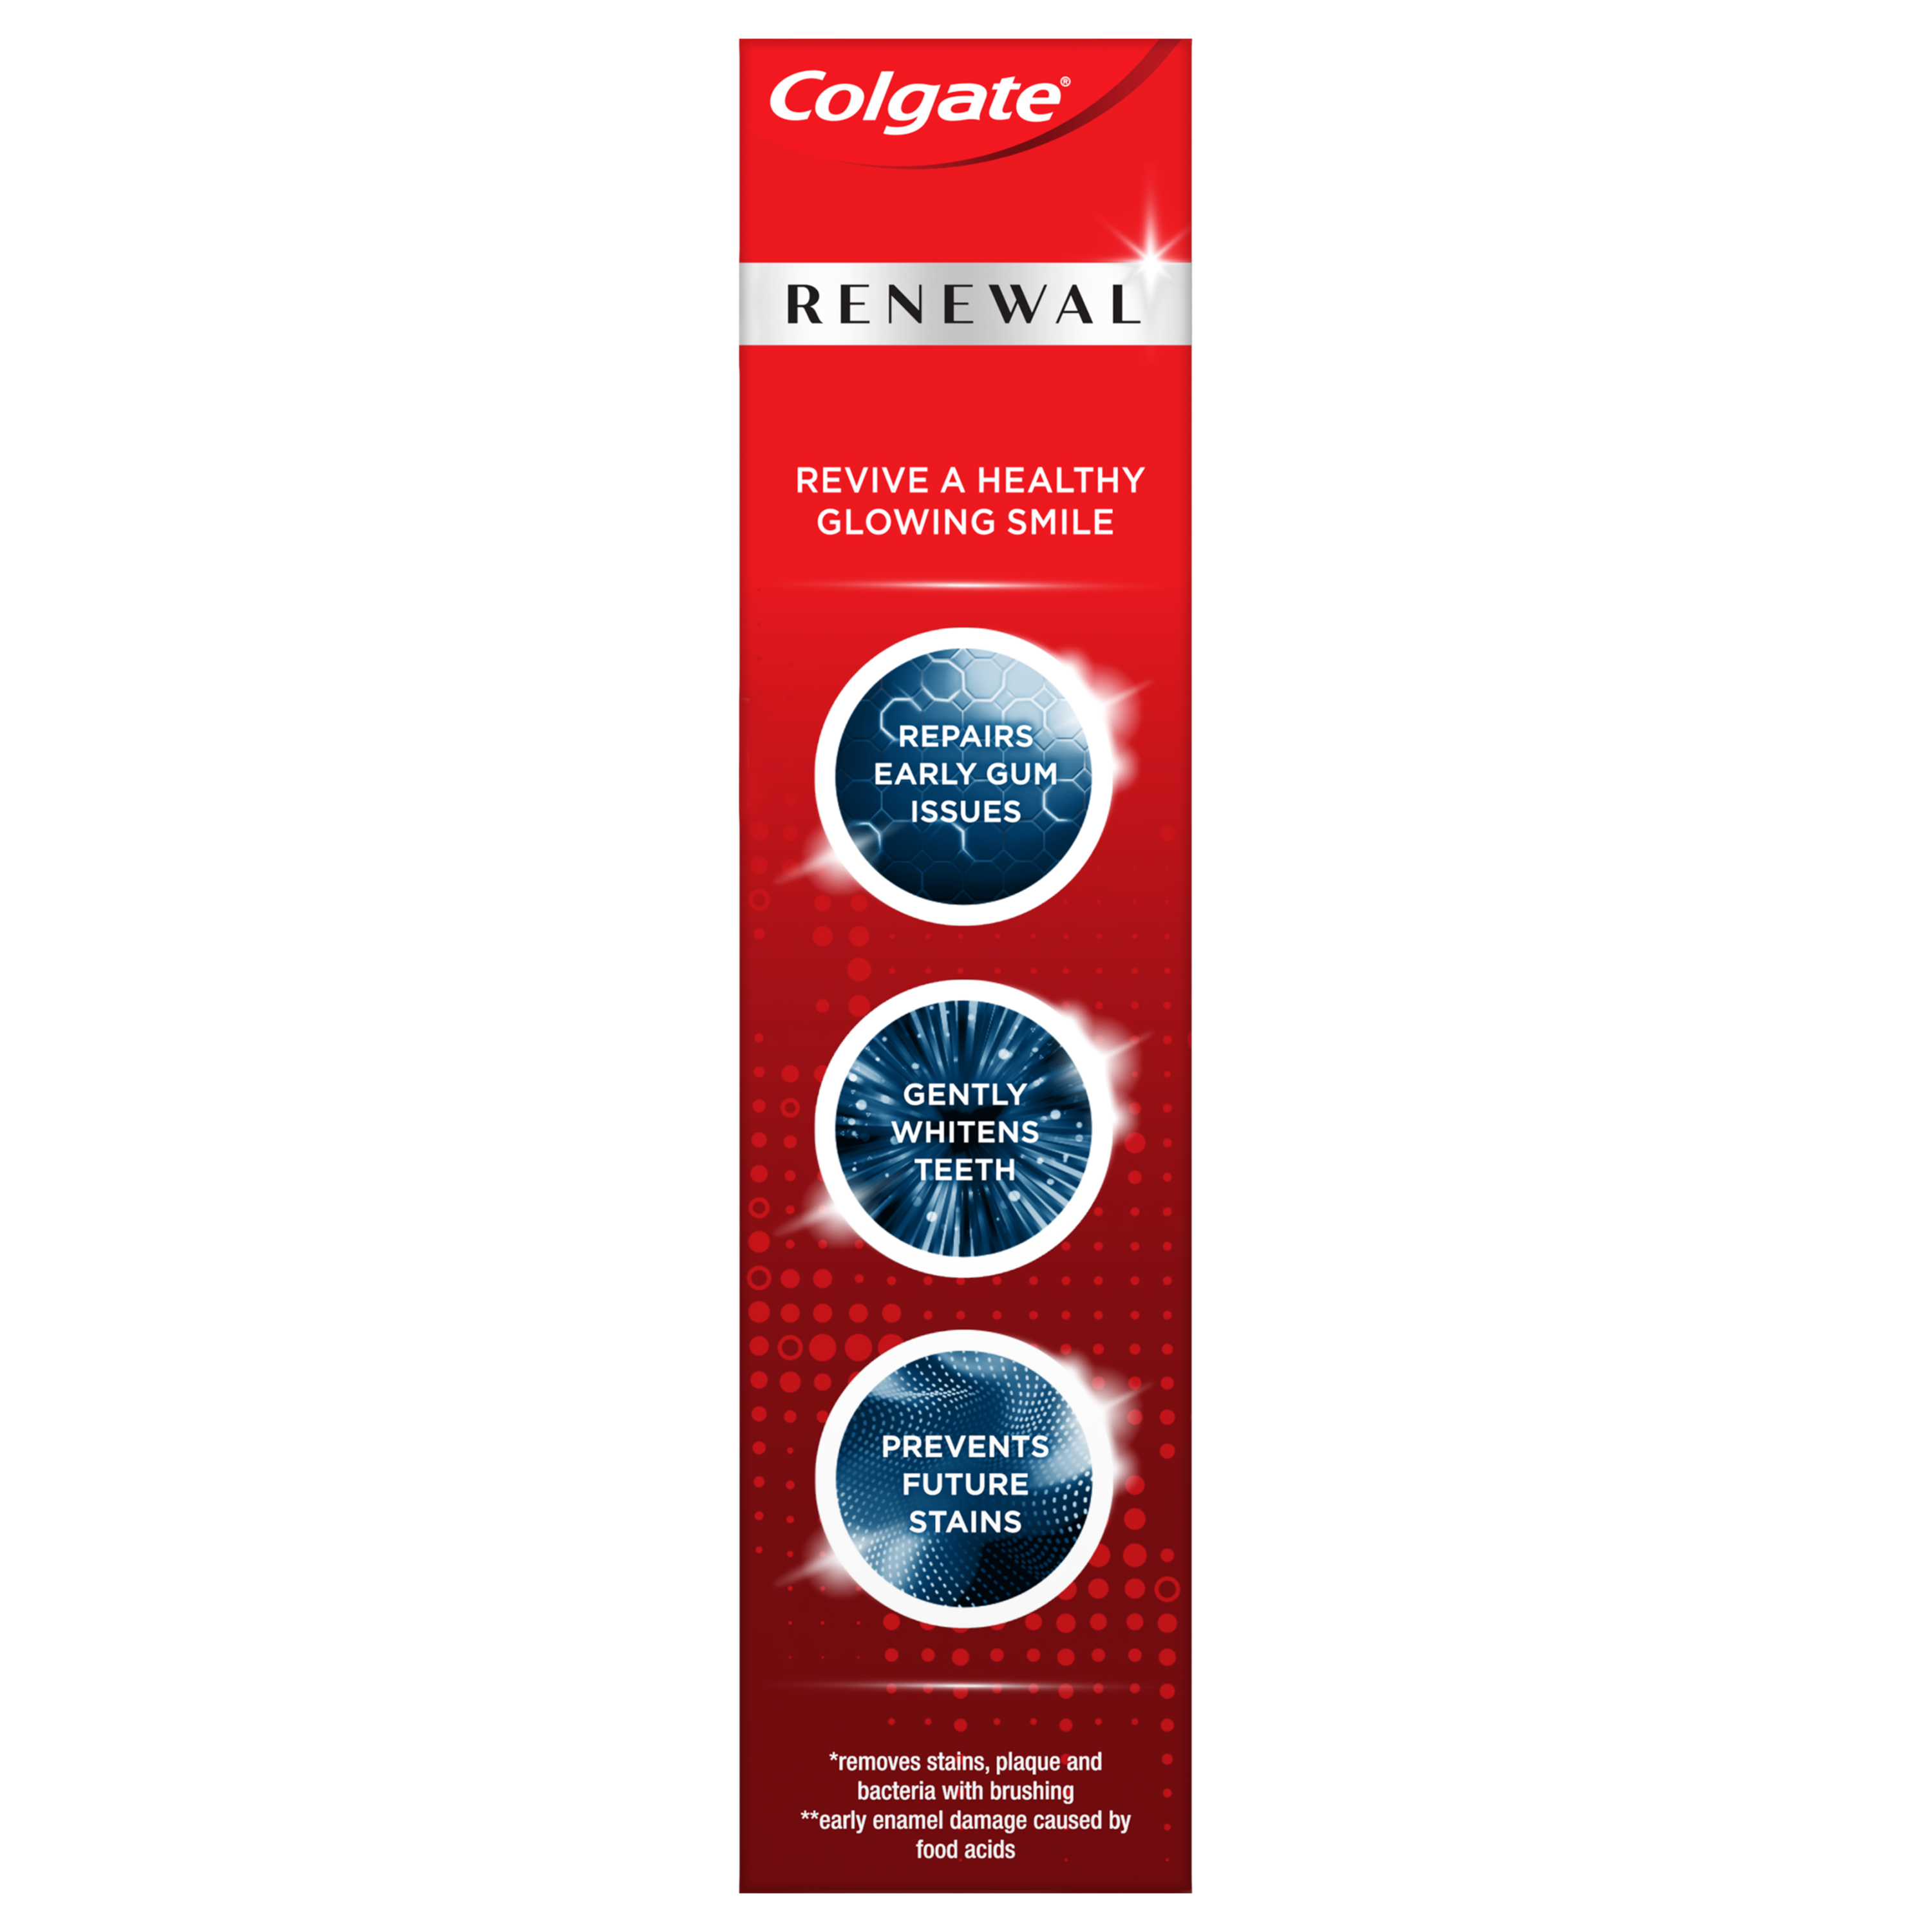 Colgate Renewal Gum Protection Whitening Toothpaste Gel, Mint, 3 oz - image 13 of 13